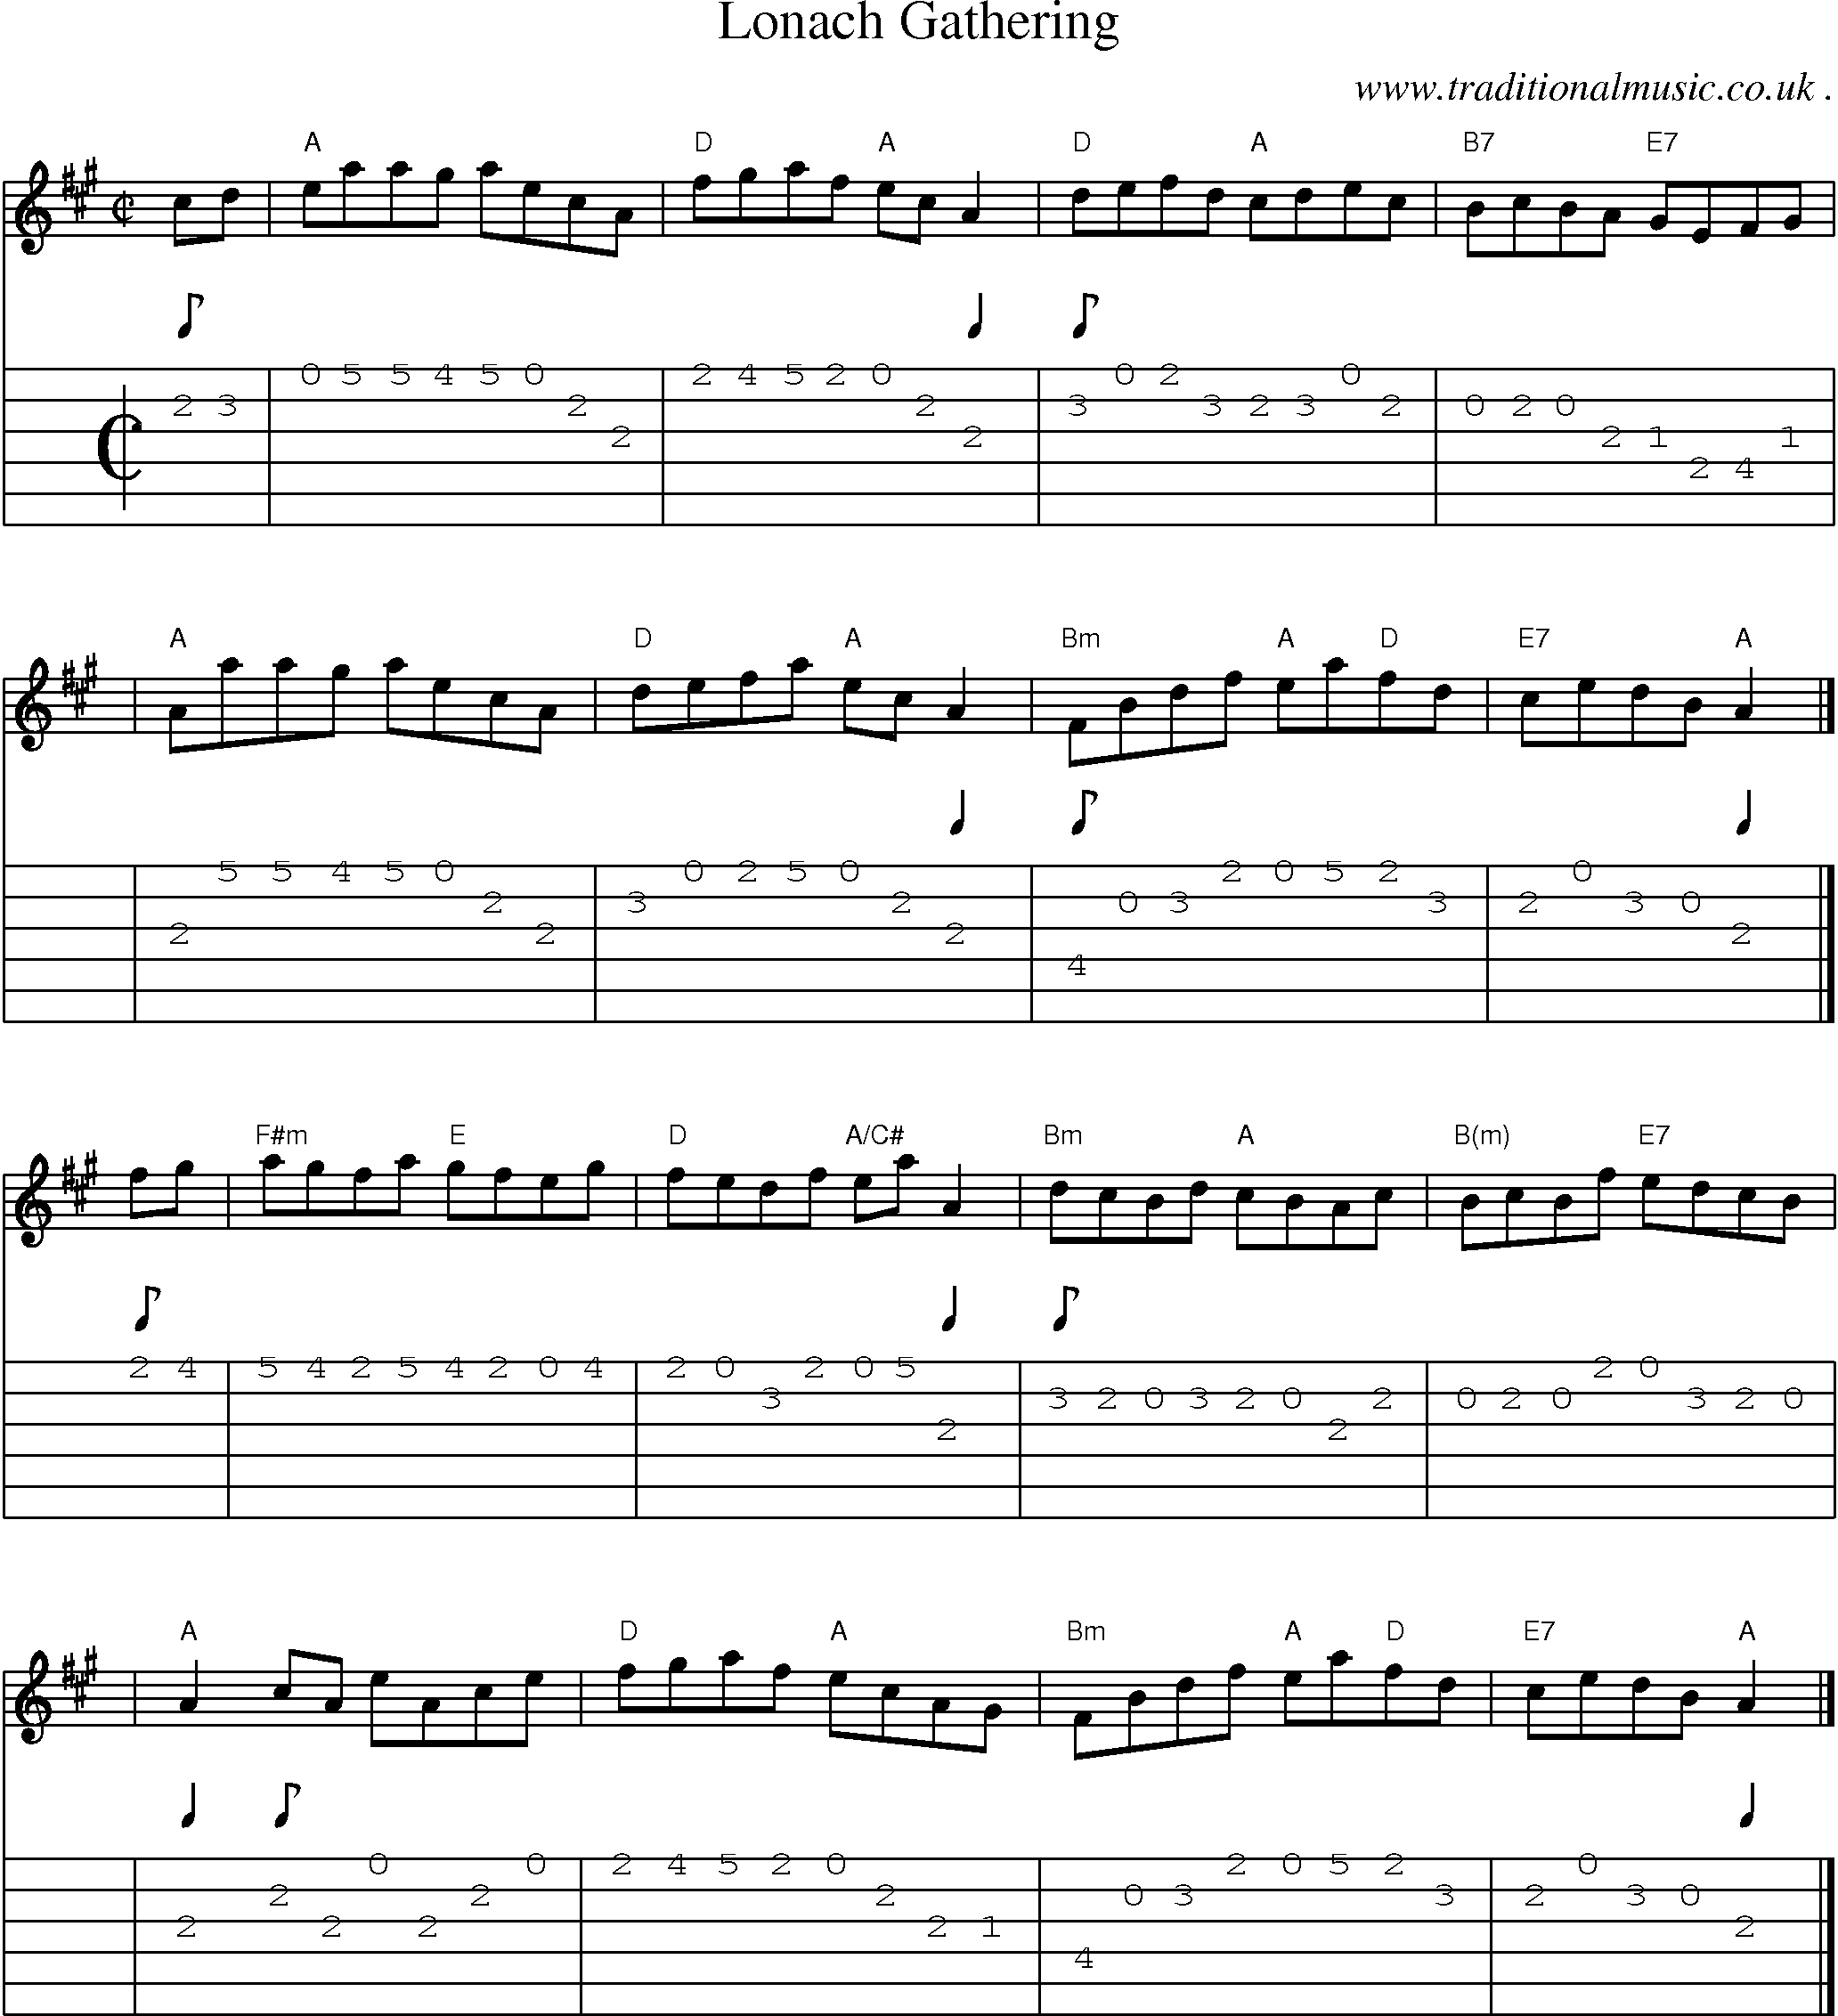 Sheet-music  score, Chords and Guitar Tabs for Lonach Gathering